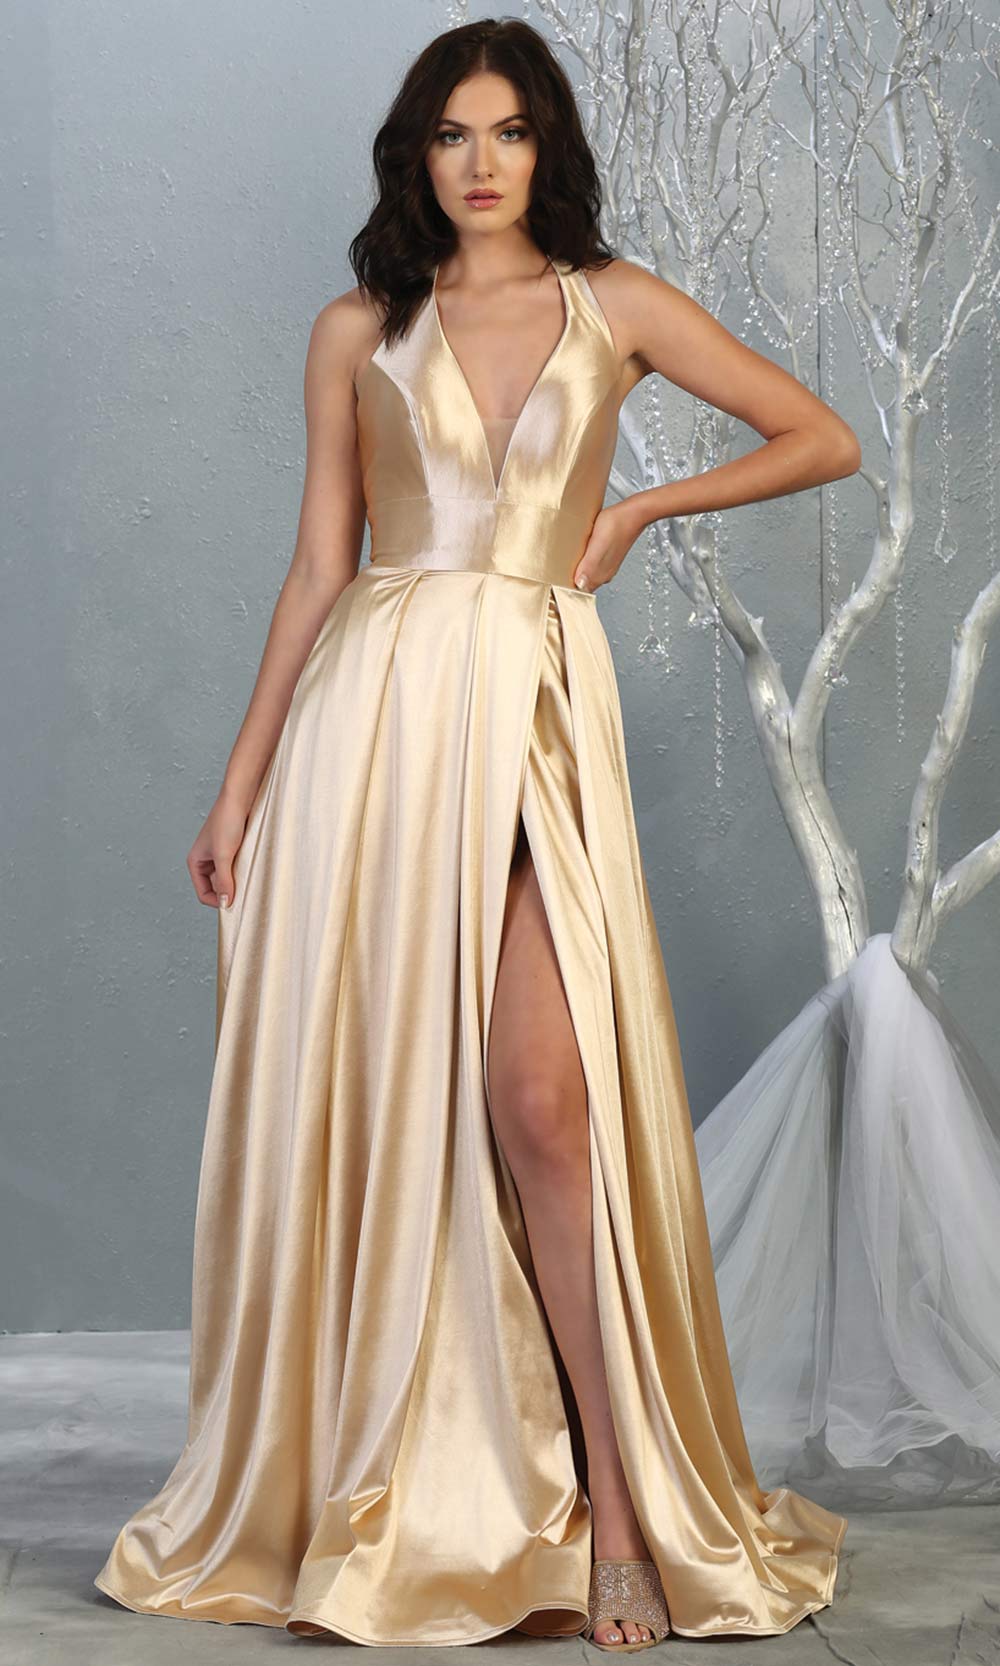 Mayqueen MQ 1741 long champagne halter evening flowy dress w/low back & high slit.Full length light gold satin gown is perfect for enagagement/e-shoot dress,formal wedding guest, indowestern gown, evening party dress,prom, bridesmaid. Plus sizes avail.jpg